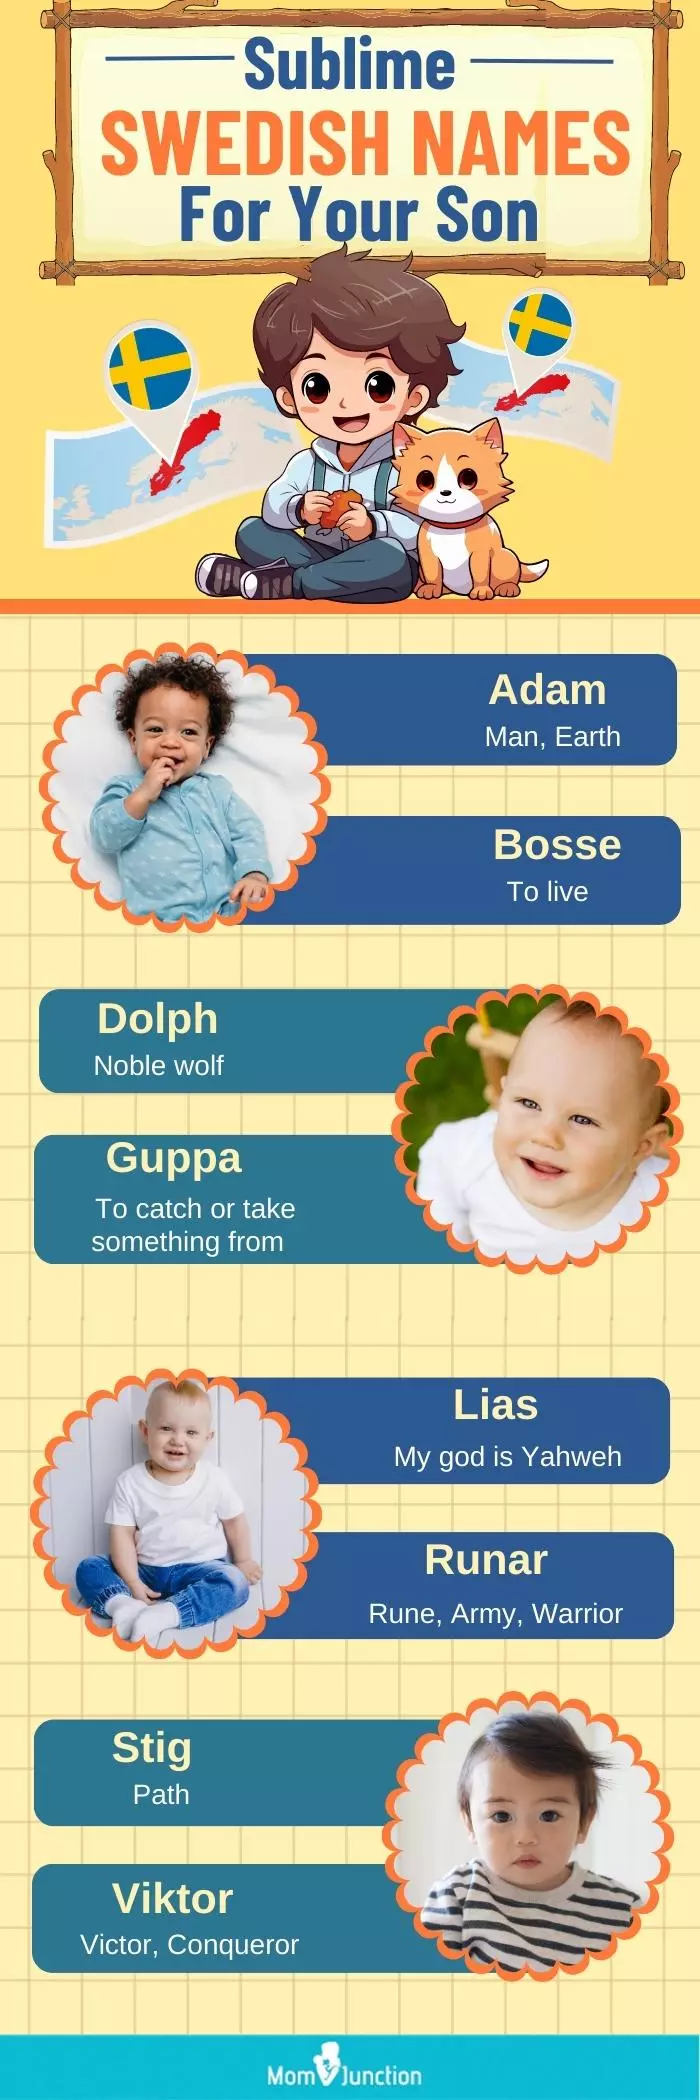 sublime swedish names for your son (infographic)